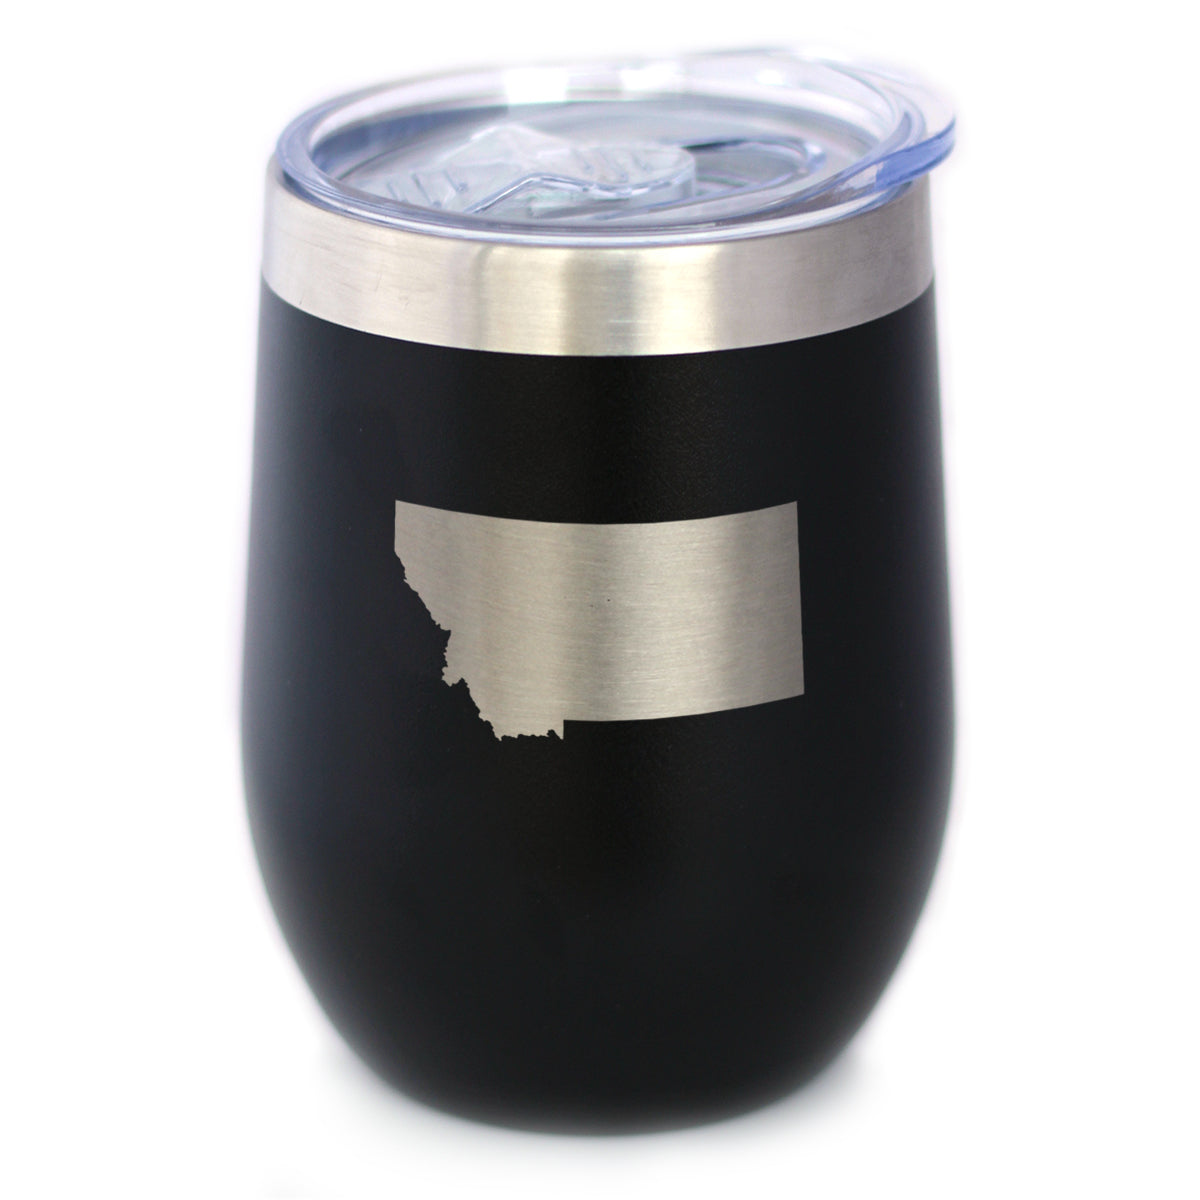 Montana State Outline - Wine Tumbler Glass with Sliding Lid - Stainless Steel Insulated Mug - Montana Gifts for Women and Men Montanans